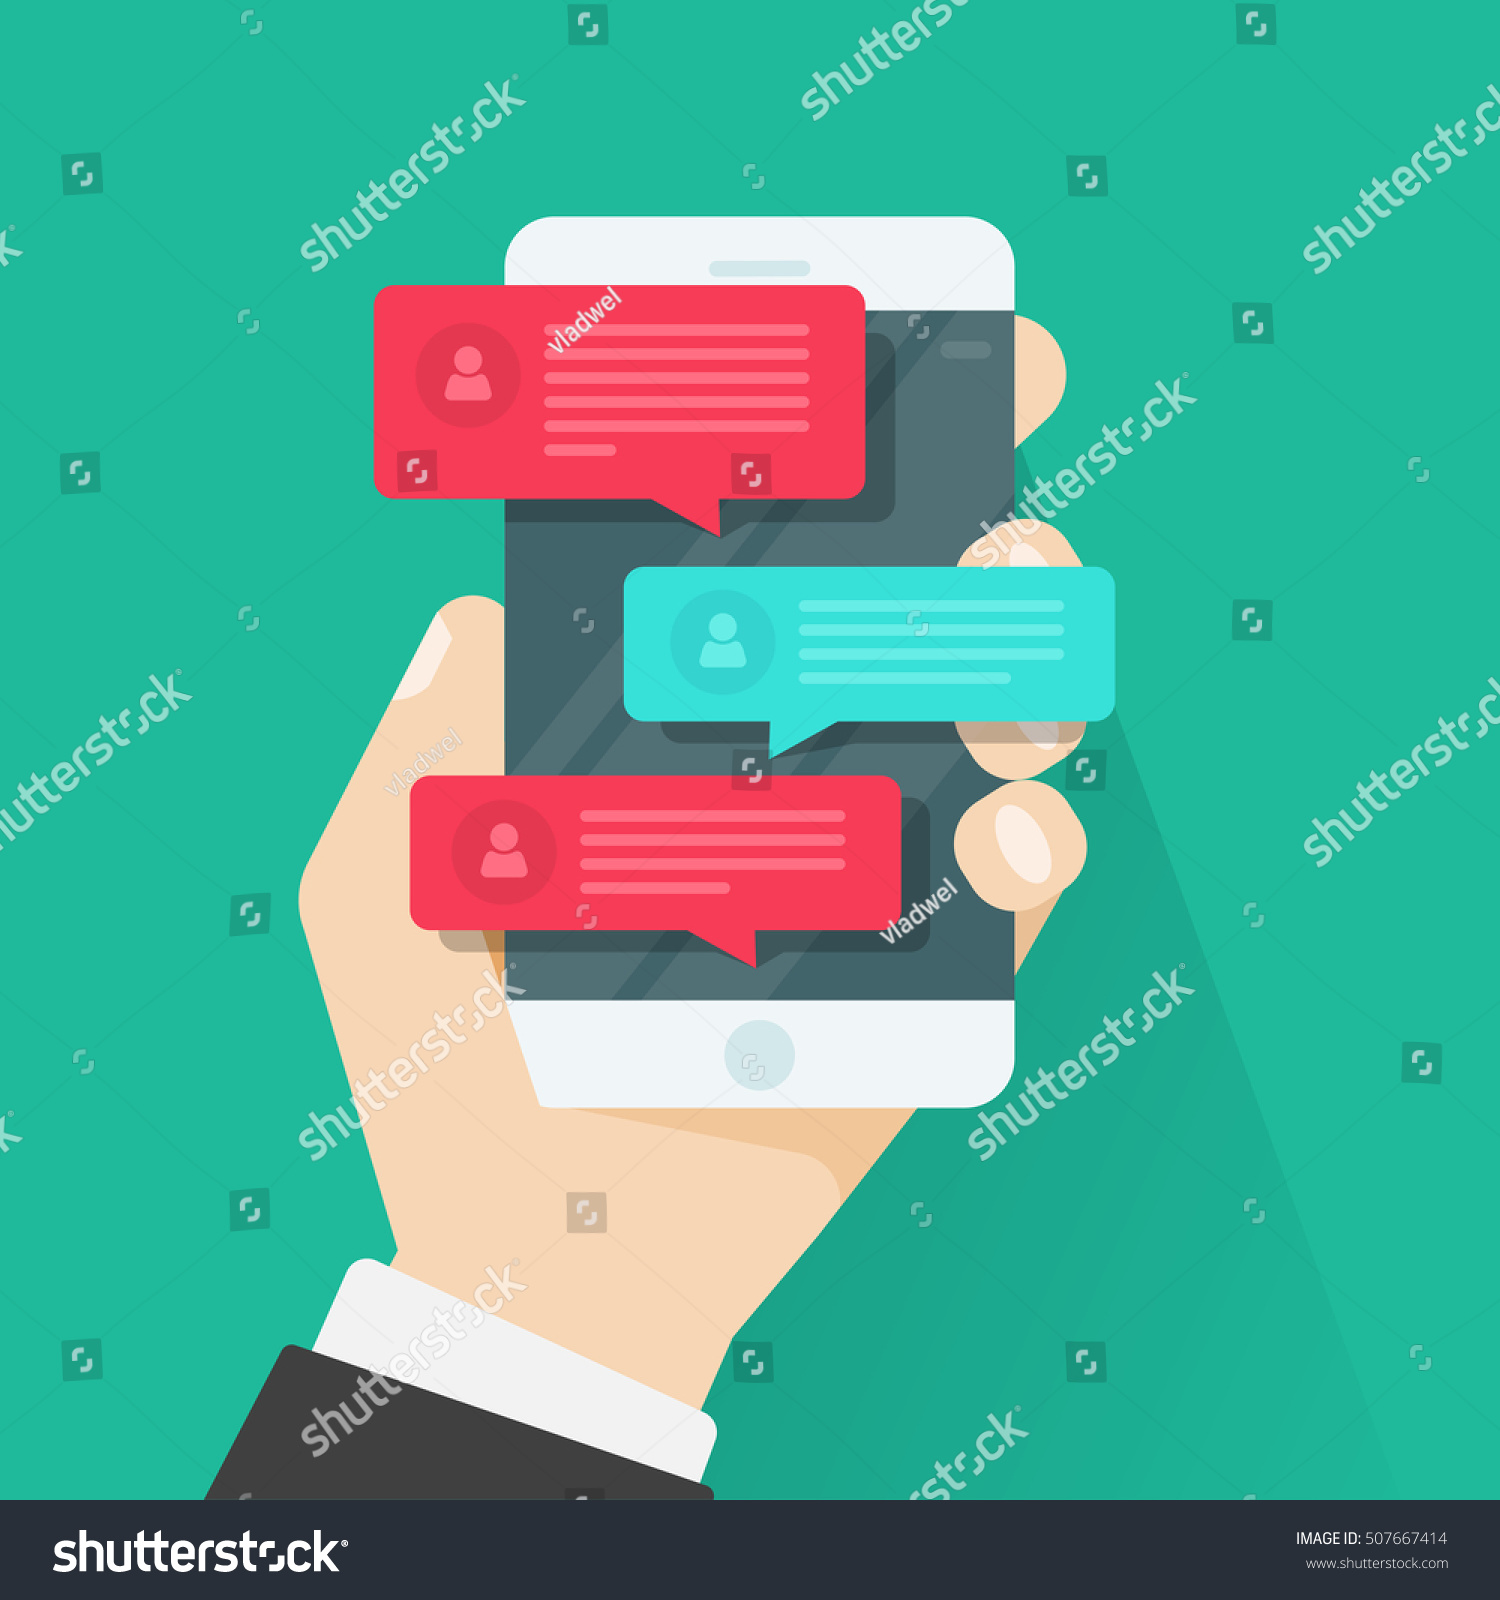 Mobile phone chat message notifications vector illustration isolated on color background, hand with smartphone and chatting bubble speeches, concept of online talking, speak, conversation, dialog #507667414